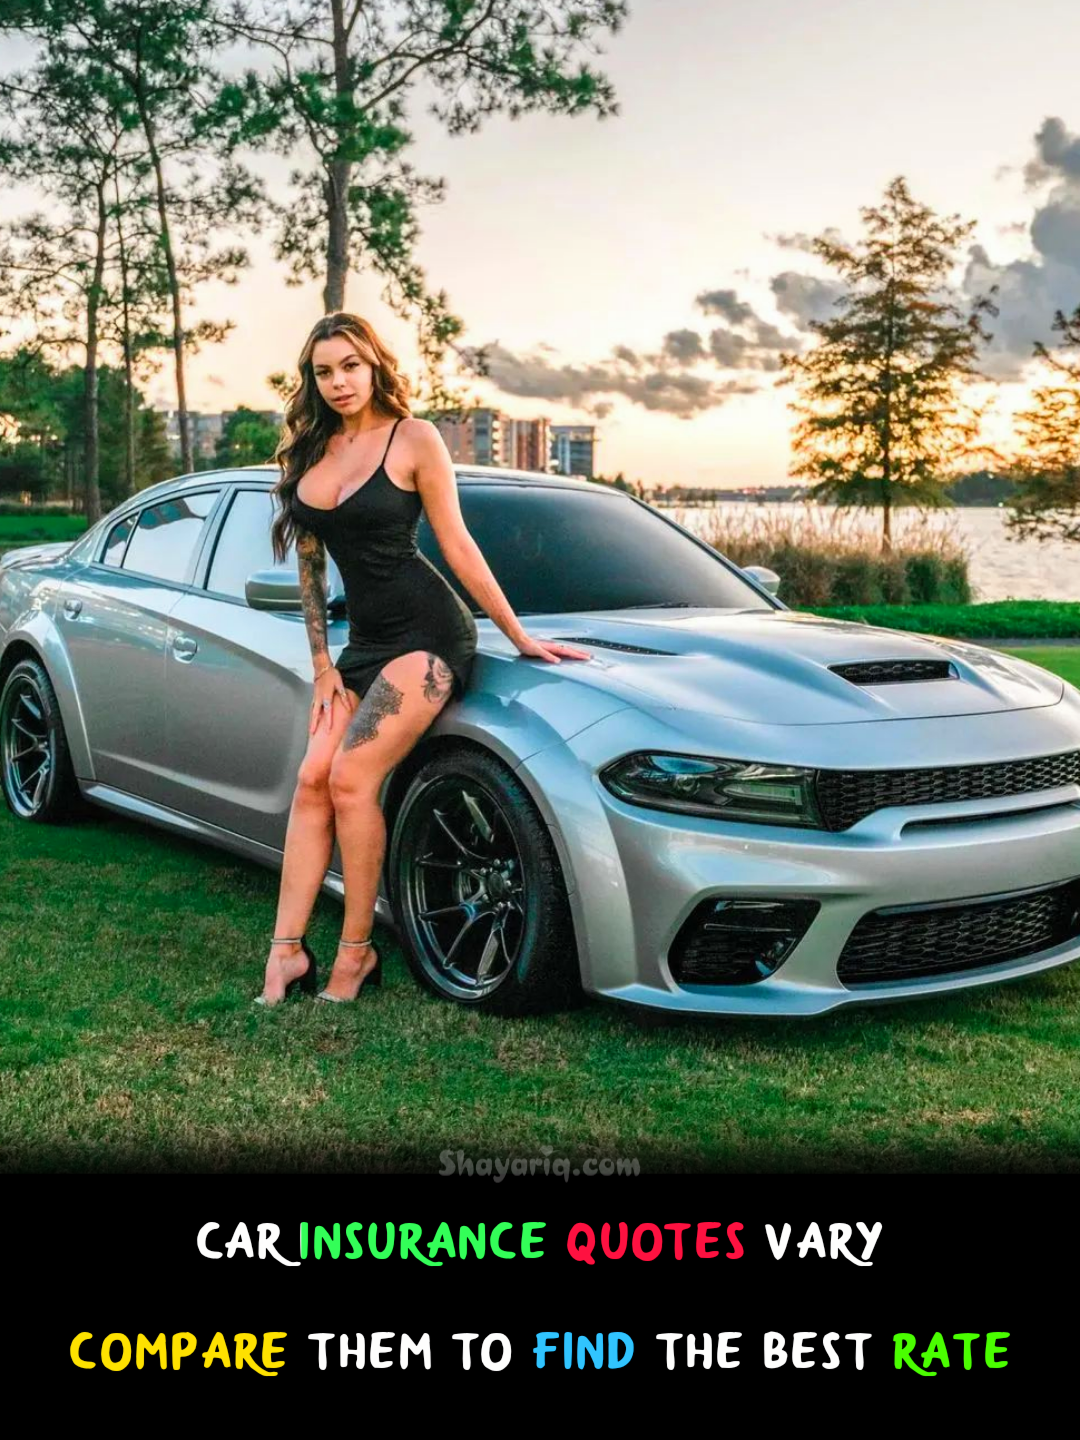 Get Car Insurance Quotes Online